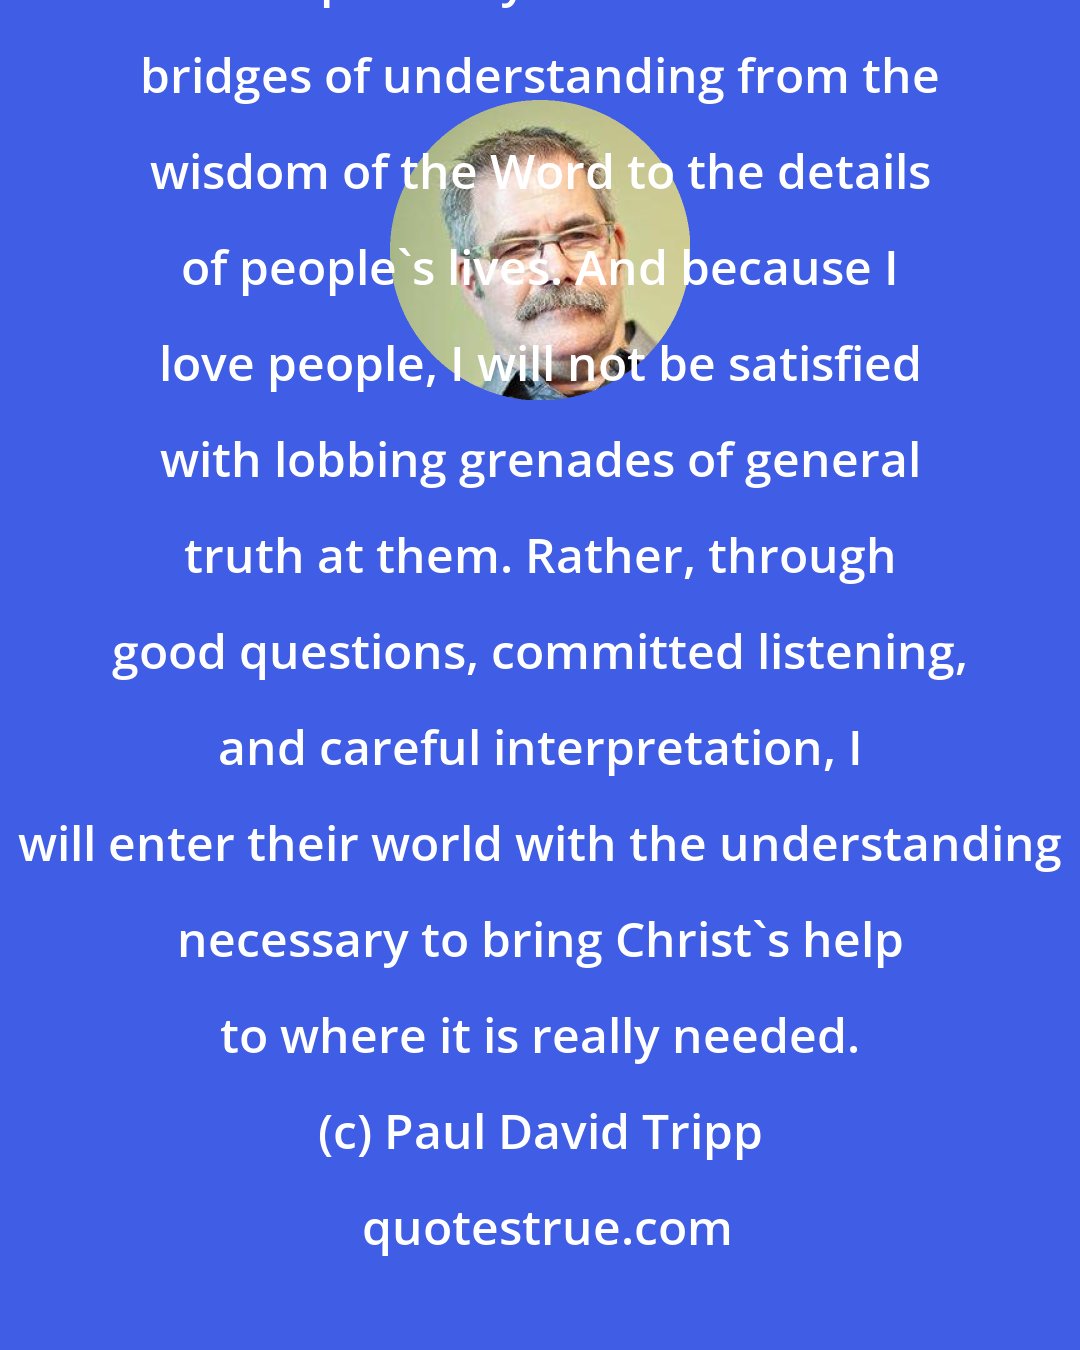 Paul David Tripp: Becaise I love God, I want to handle his truth with accuracy, clarity, and specificity. I want to build bridges of understanding from the wisdom of the Word to the details of people's lives. And because I love people, I will not be satisfied with lobbing grenades of general truth at them. Rather, through good questions, committed listening, and careful interpretation, I will enter their world with the understanding necessary to bring Christ's help to where it is really needed.